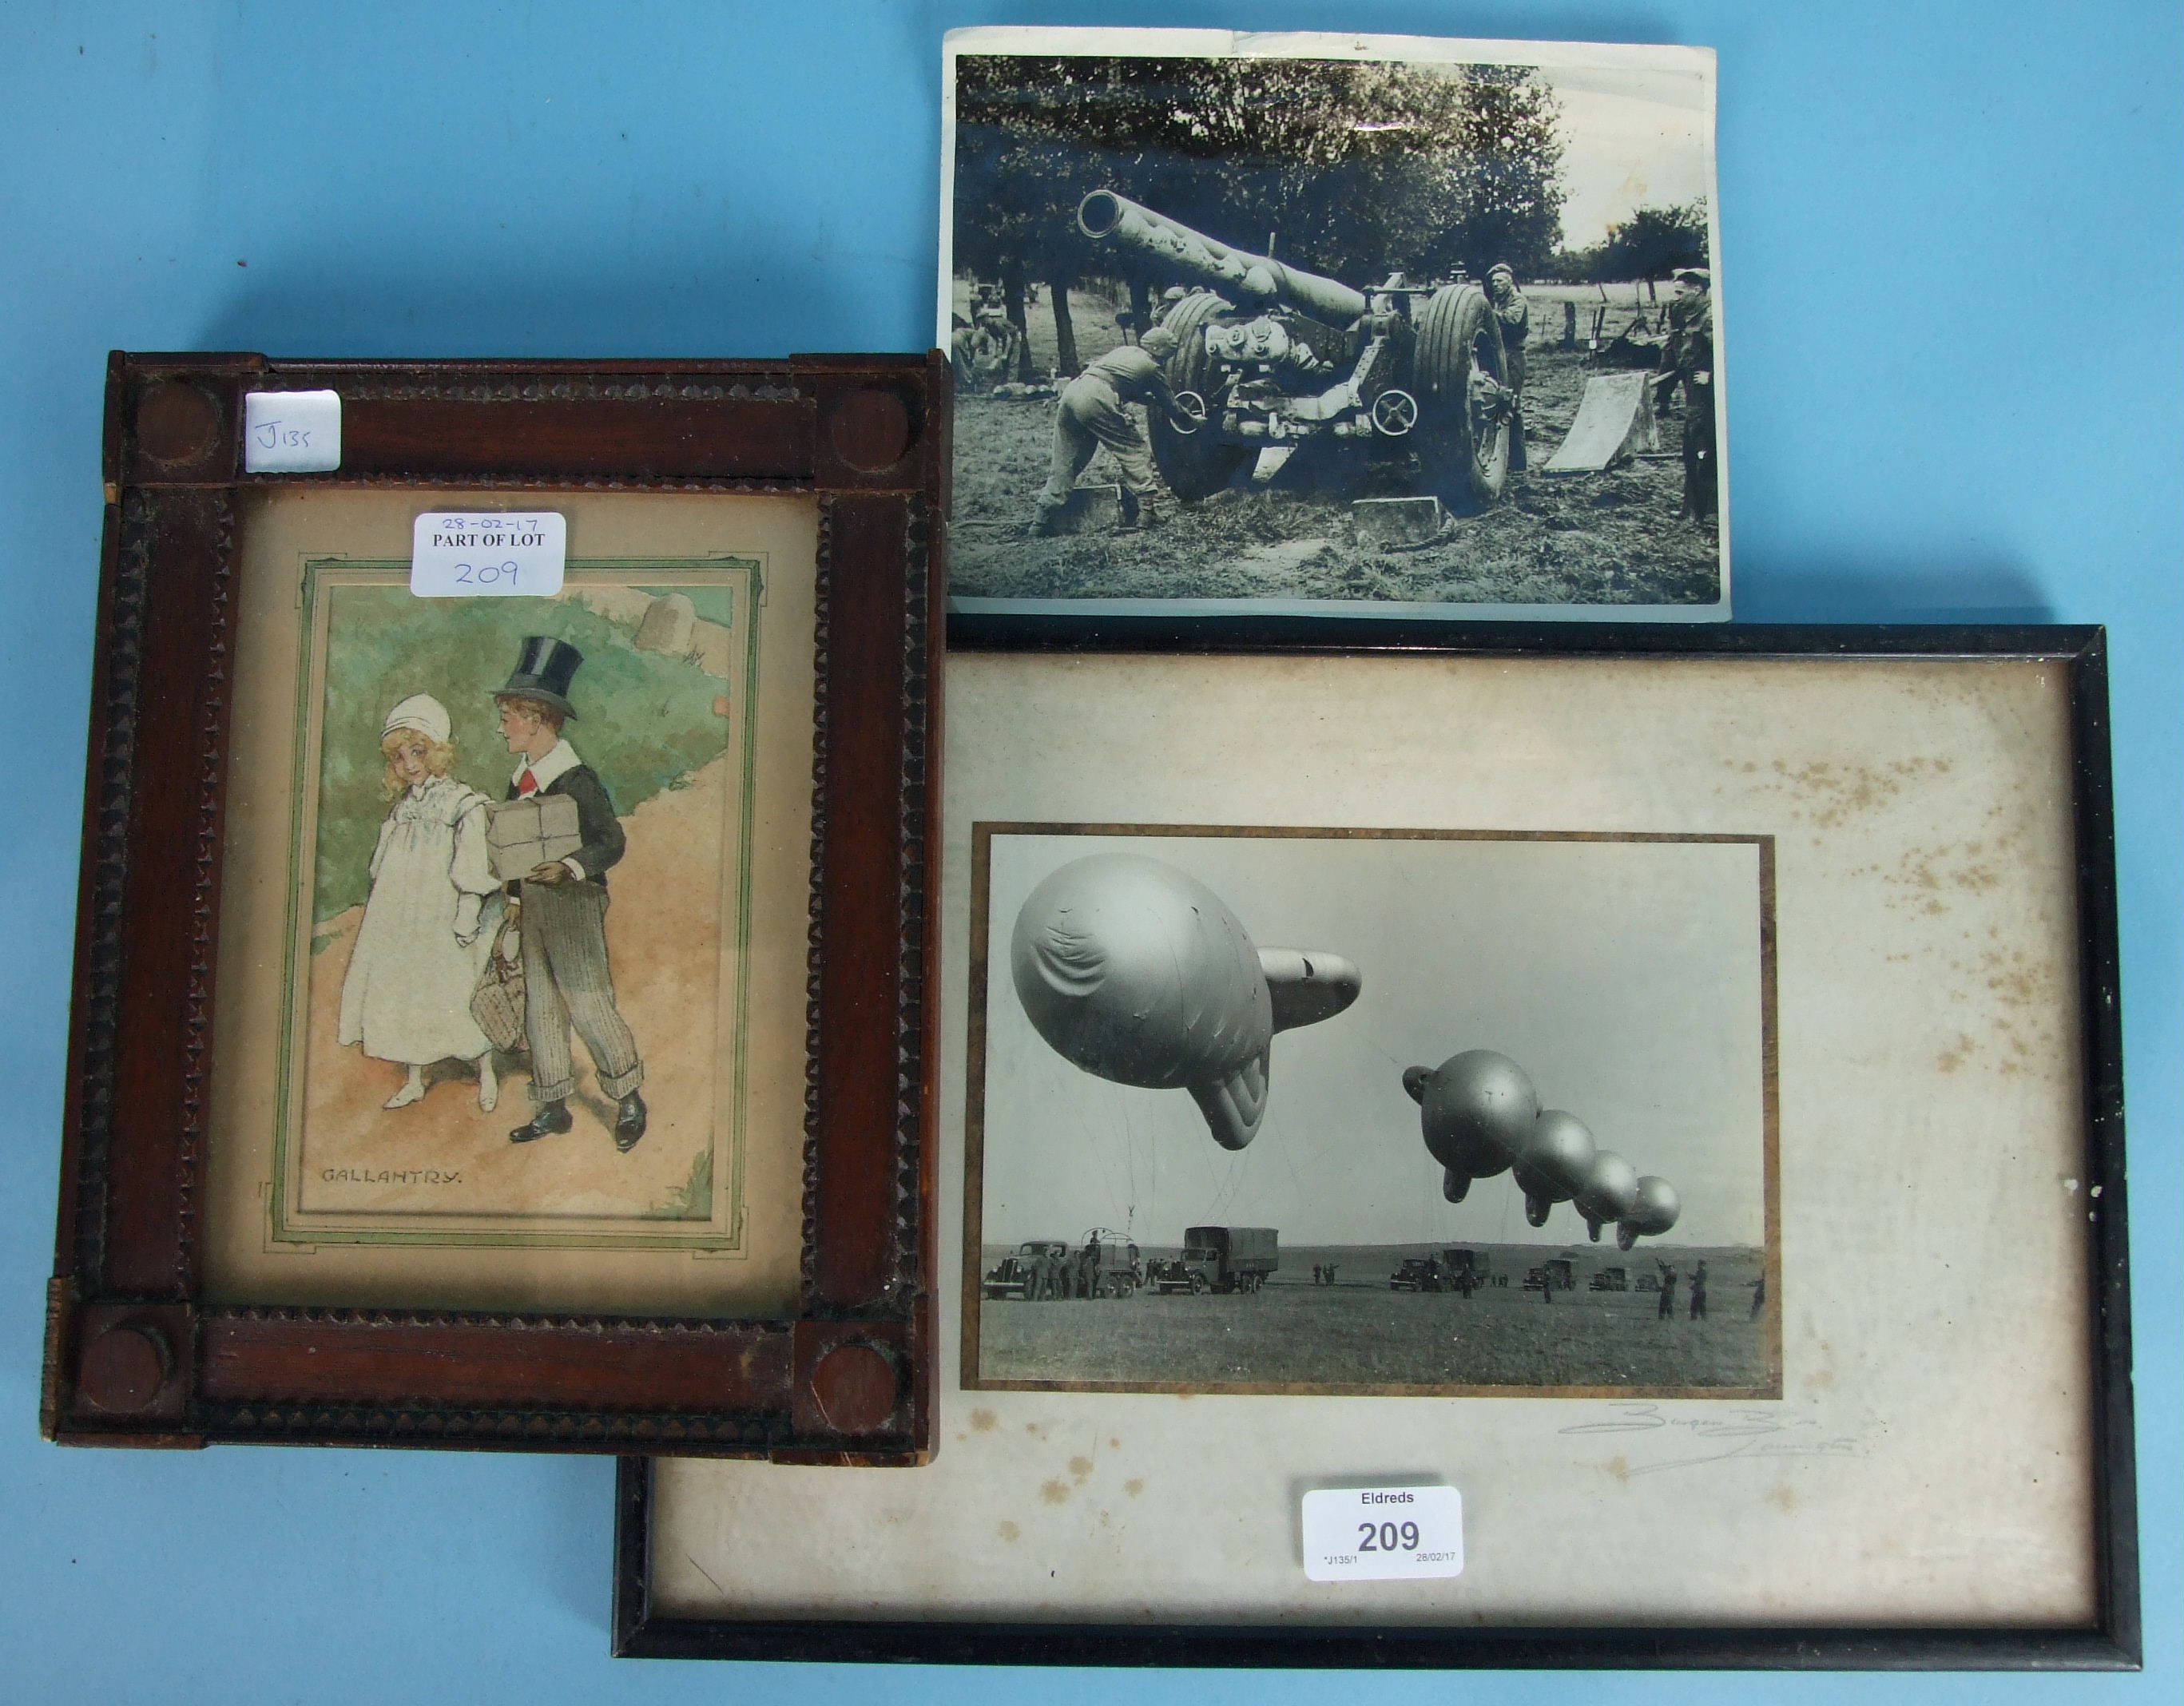 A wartime photograph of 5 barrage balloons tethered to vehicles, 13 x 19cm, framed and signed '